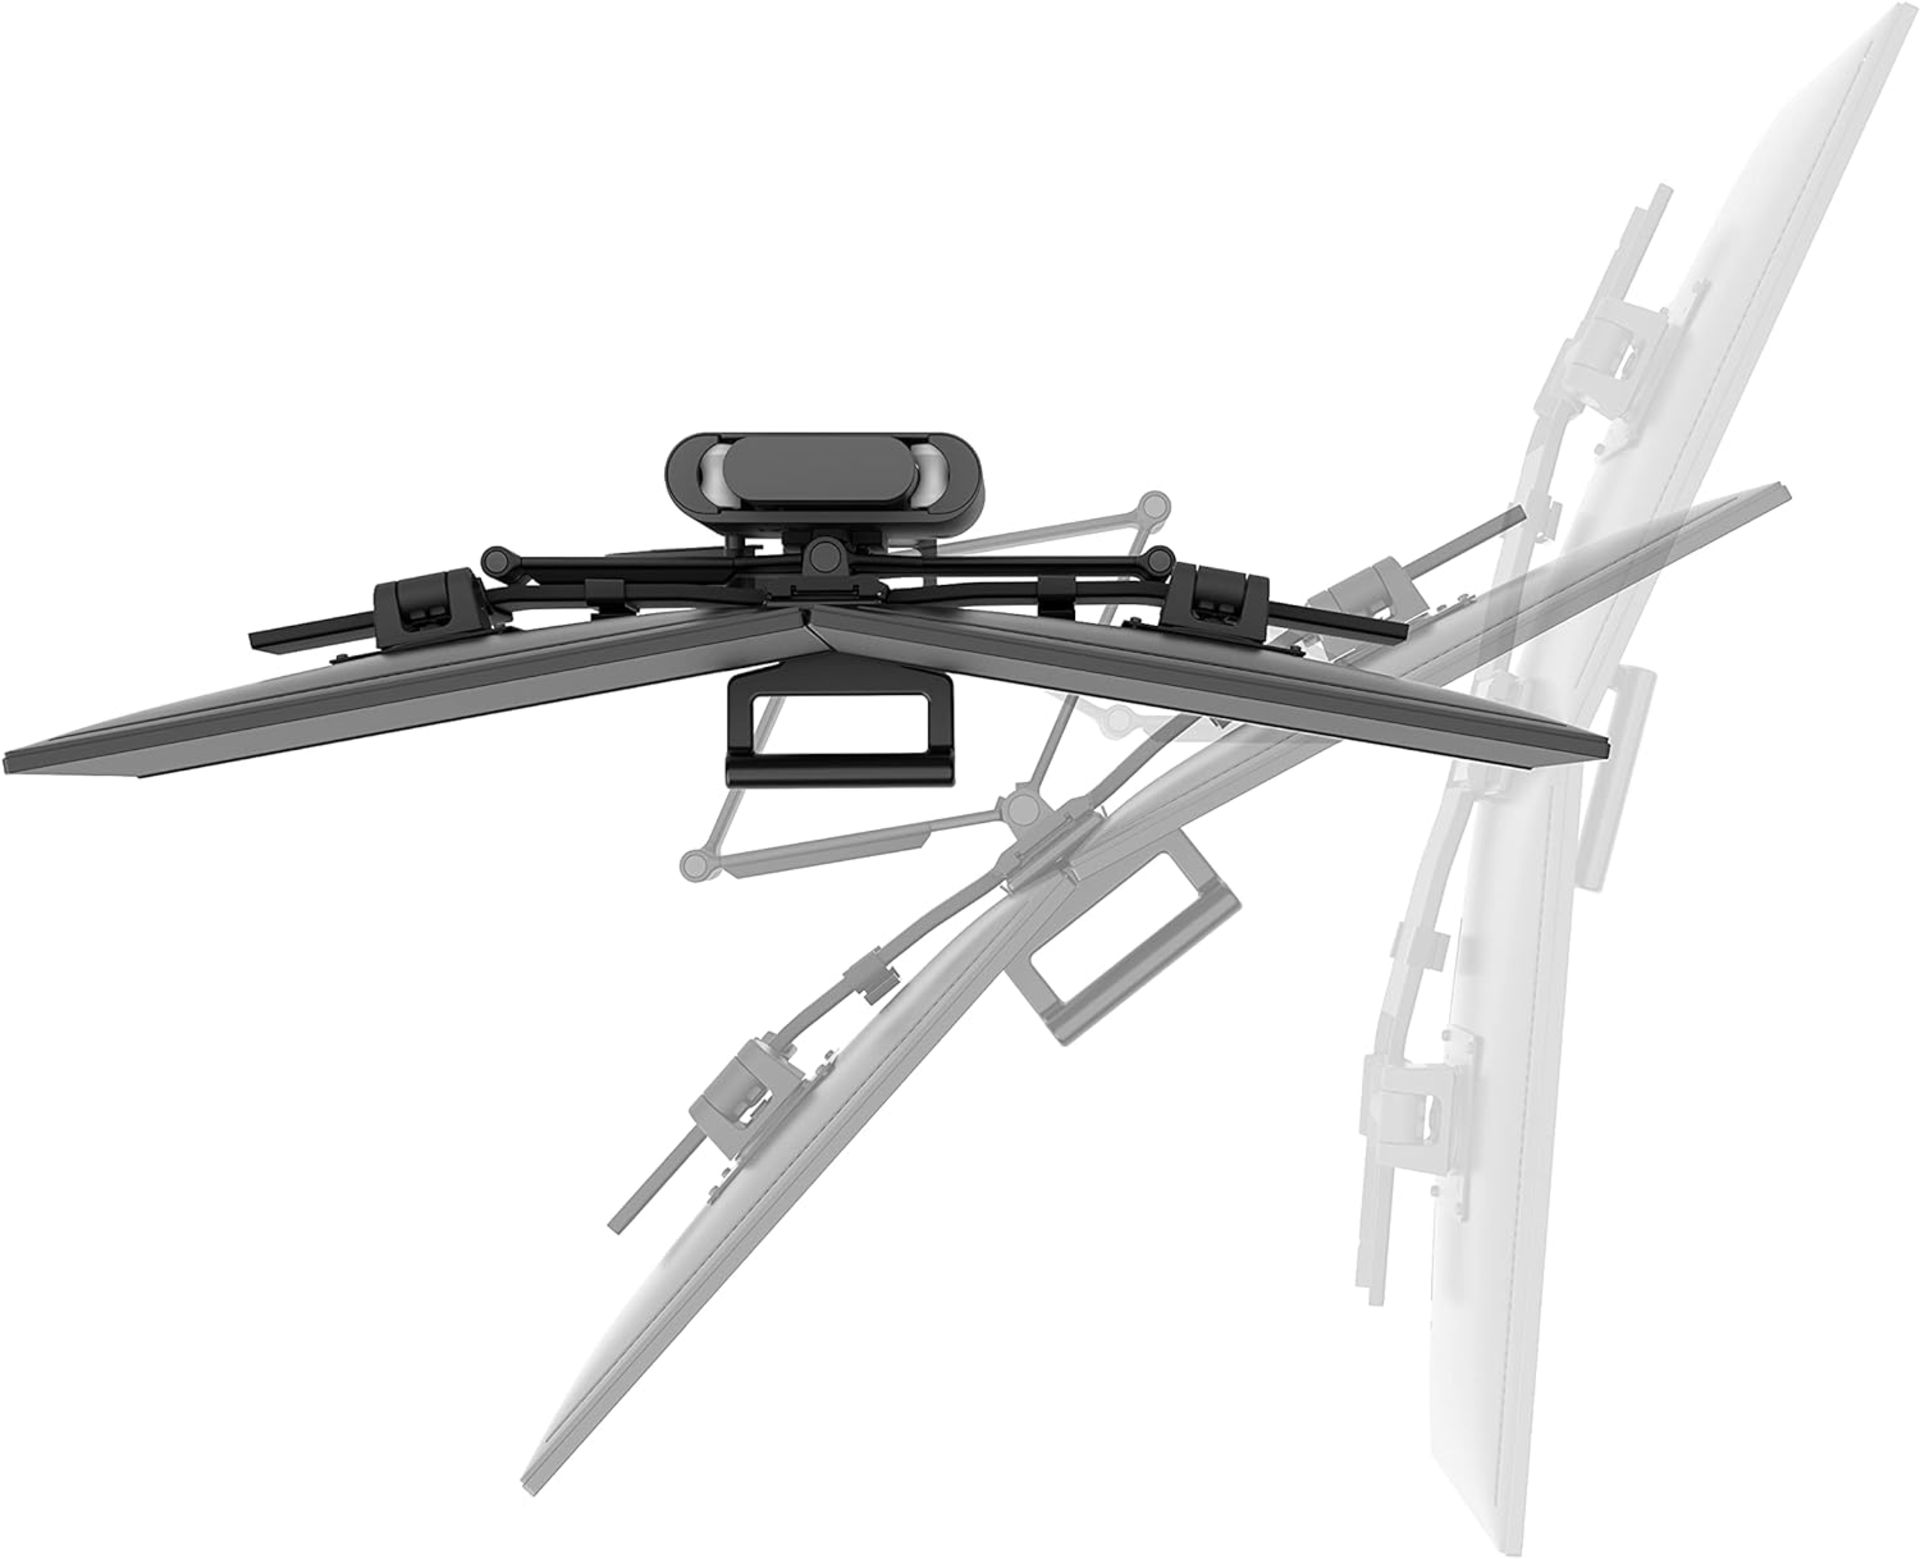 NEW & BOXED ERGOTRON Trace Dual Monitor Arm, VESA Desk Mount. RRP £417. for 2 Monitors Up to 27 - Image 3 of 8